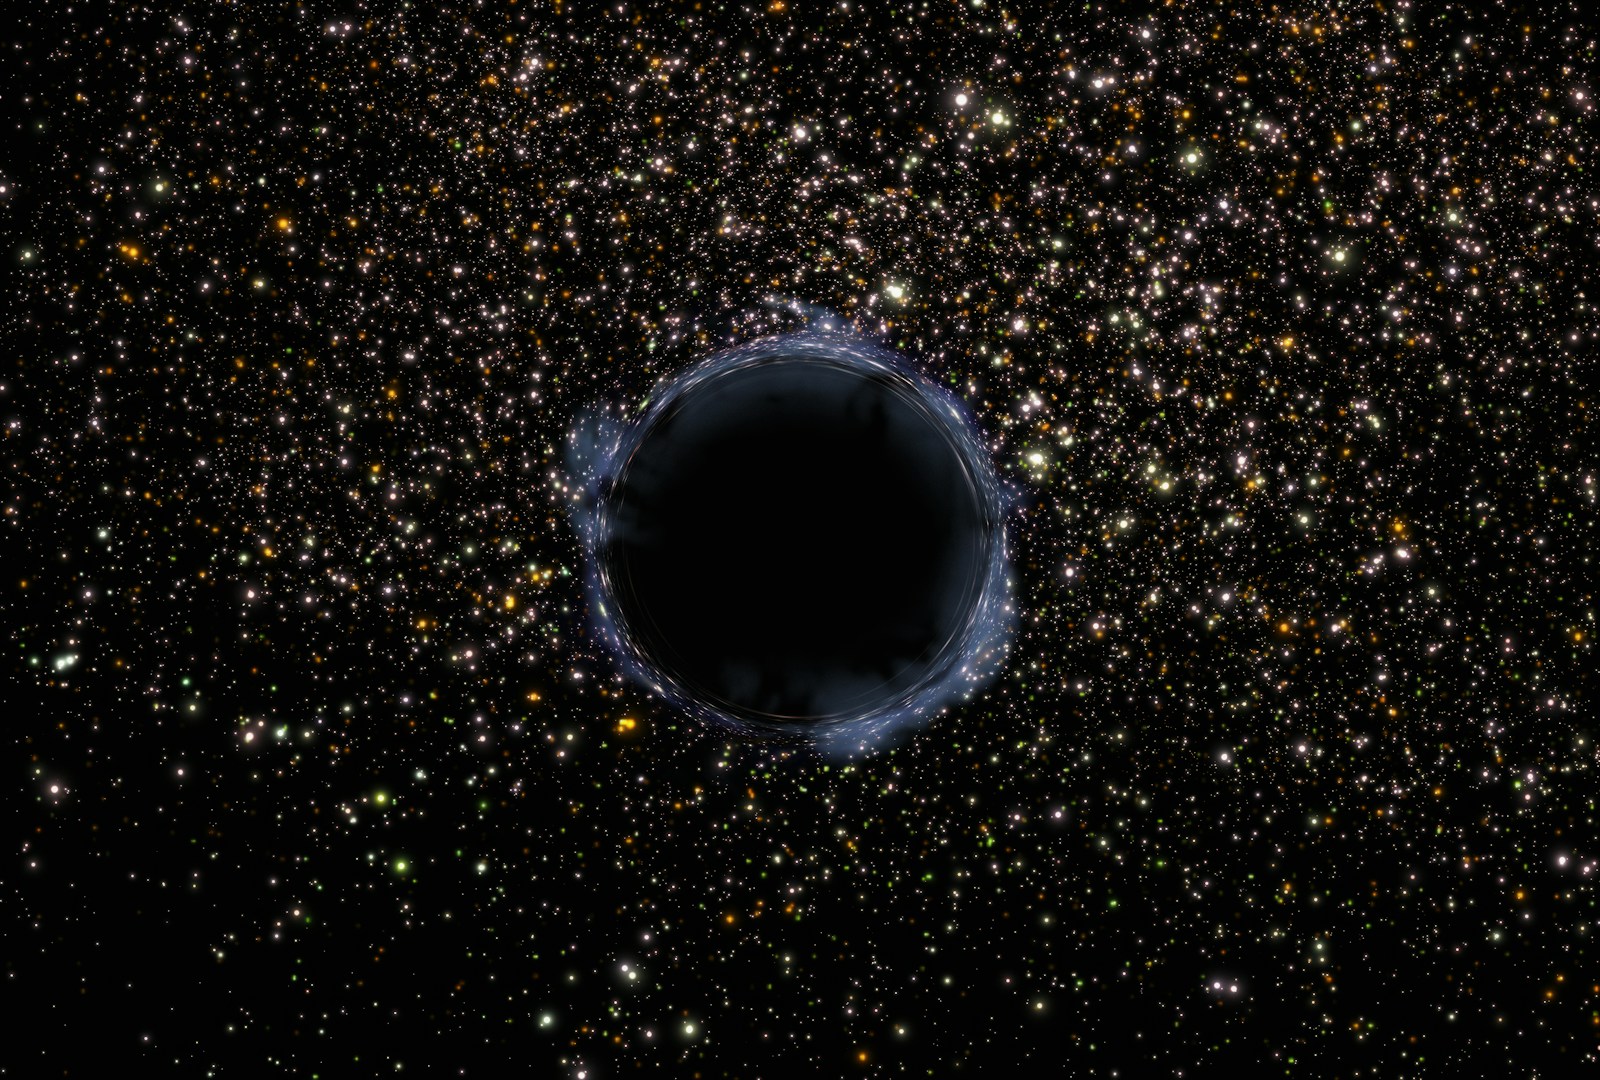 a black hole in the middle of a star filled sky